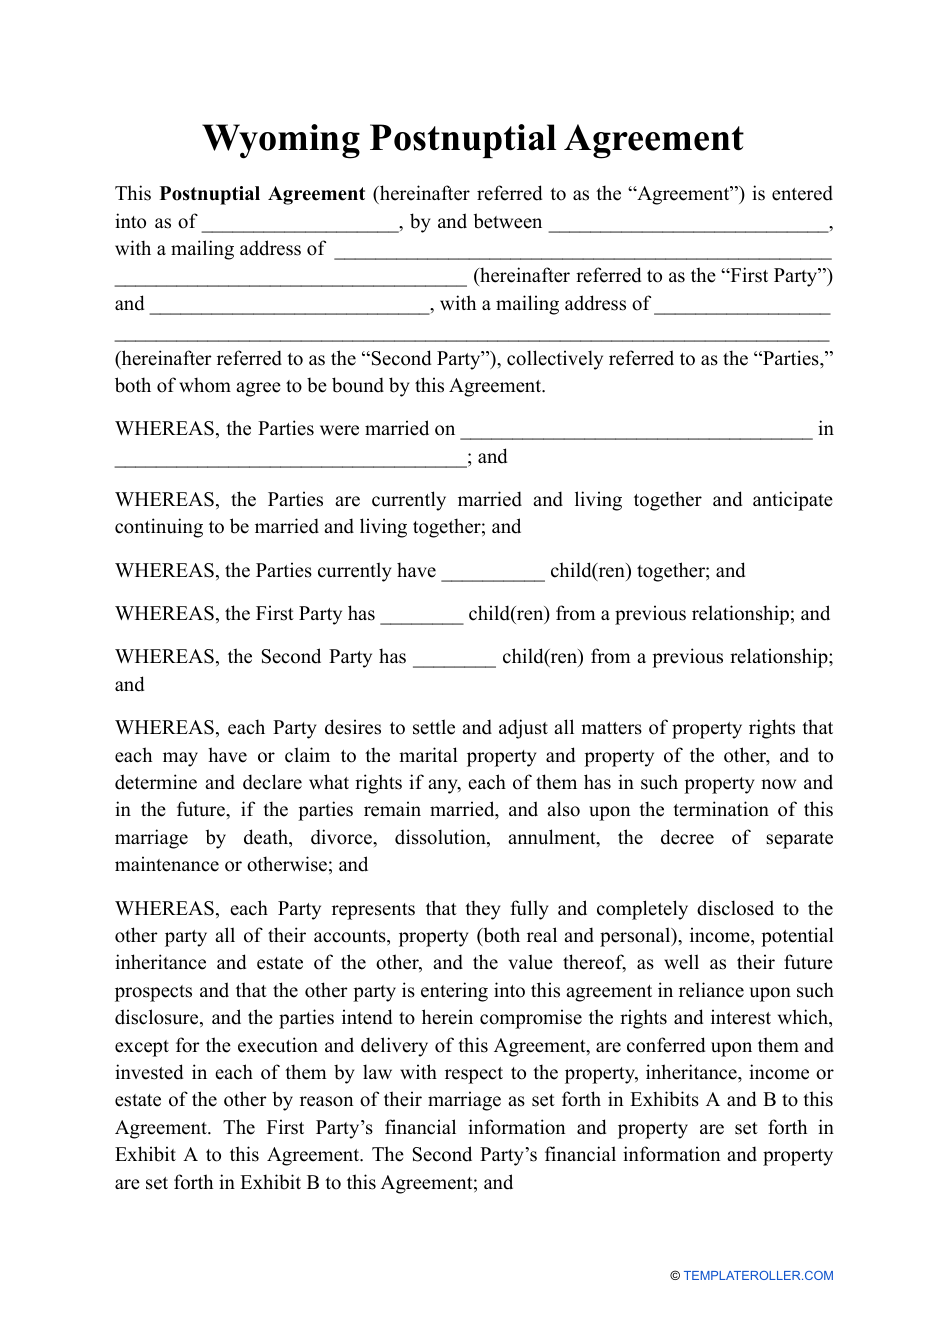 Postnuptial Agreement Template - Wyoming, Page 1